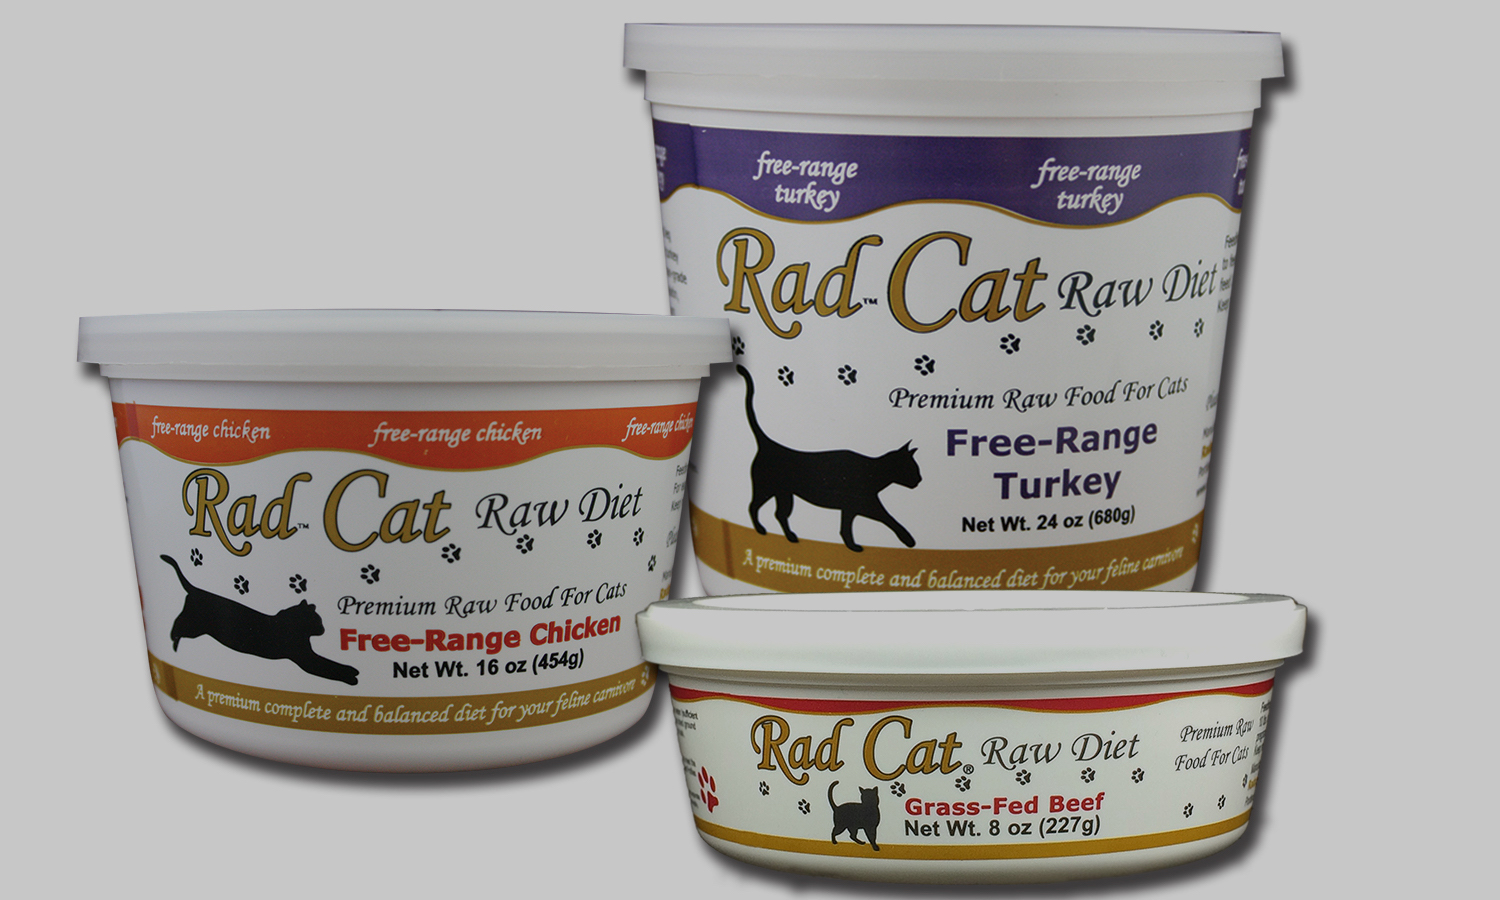 Three Flavors Of Raw Cat Food Recalled Over Listeria, Salmonella Contamination